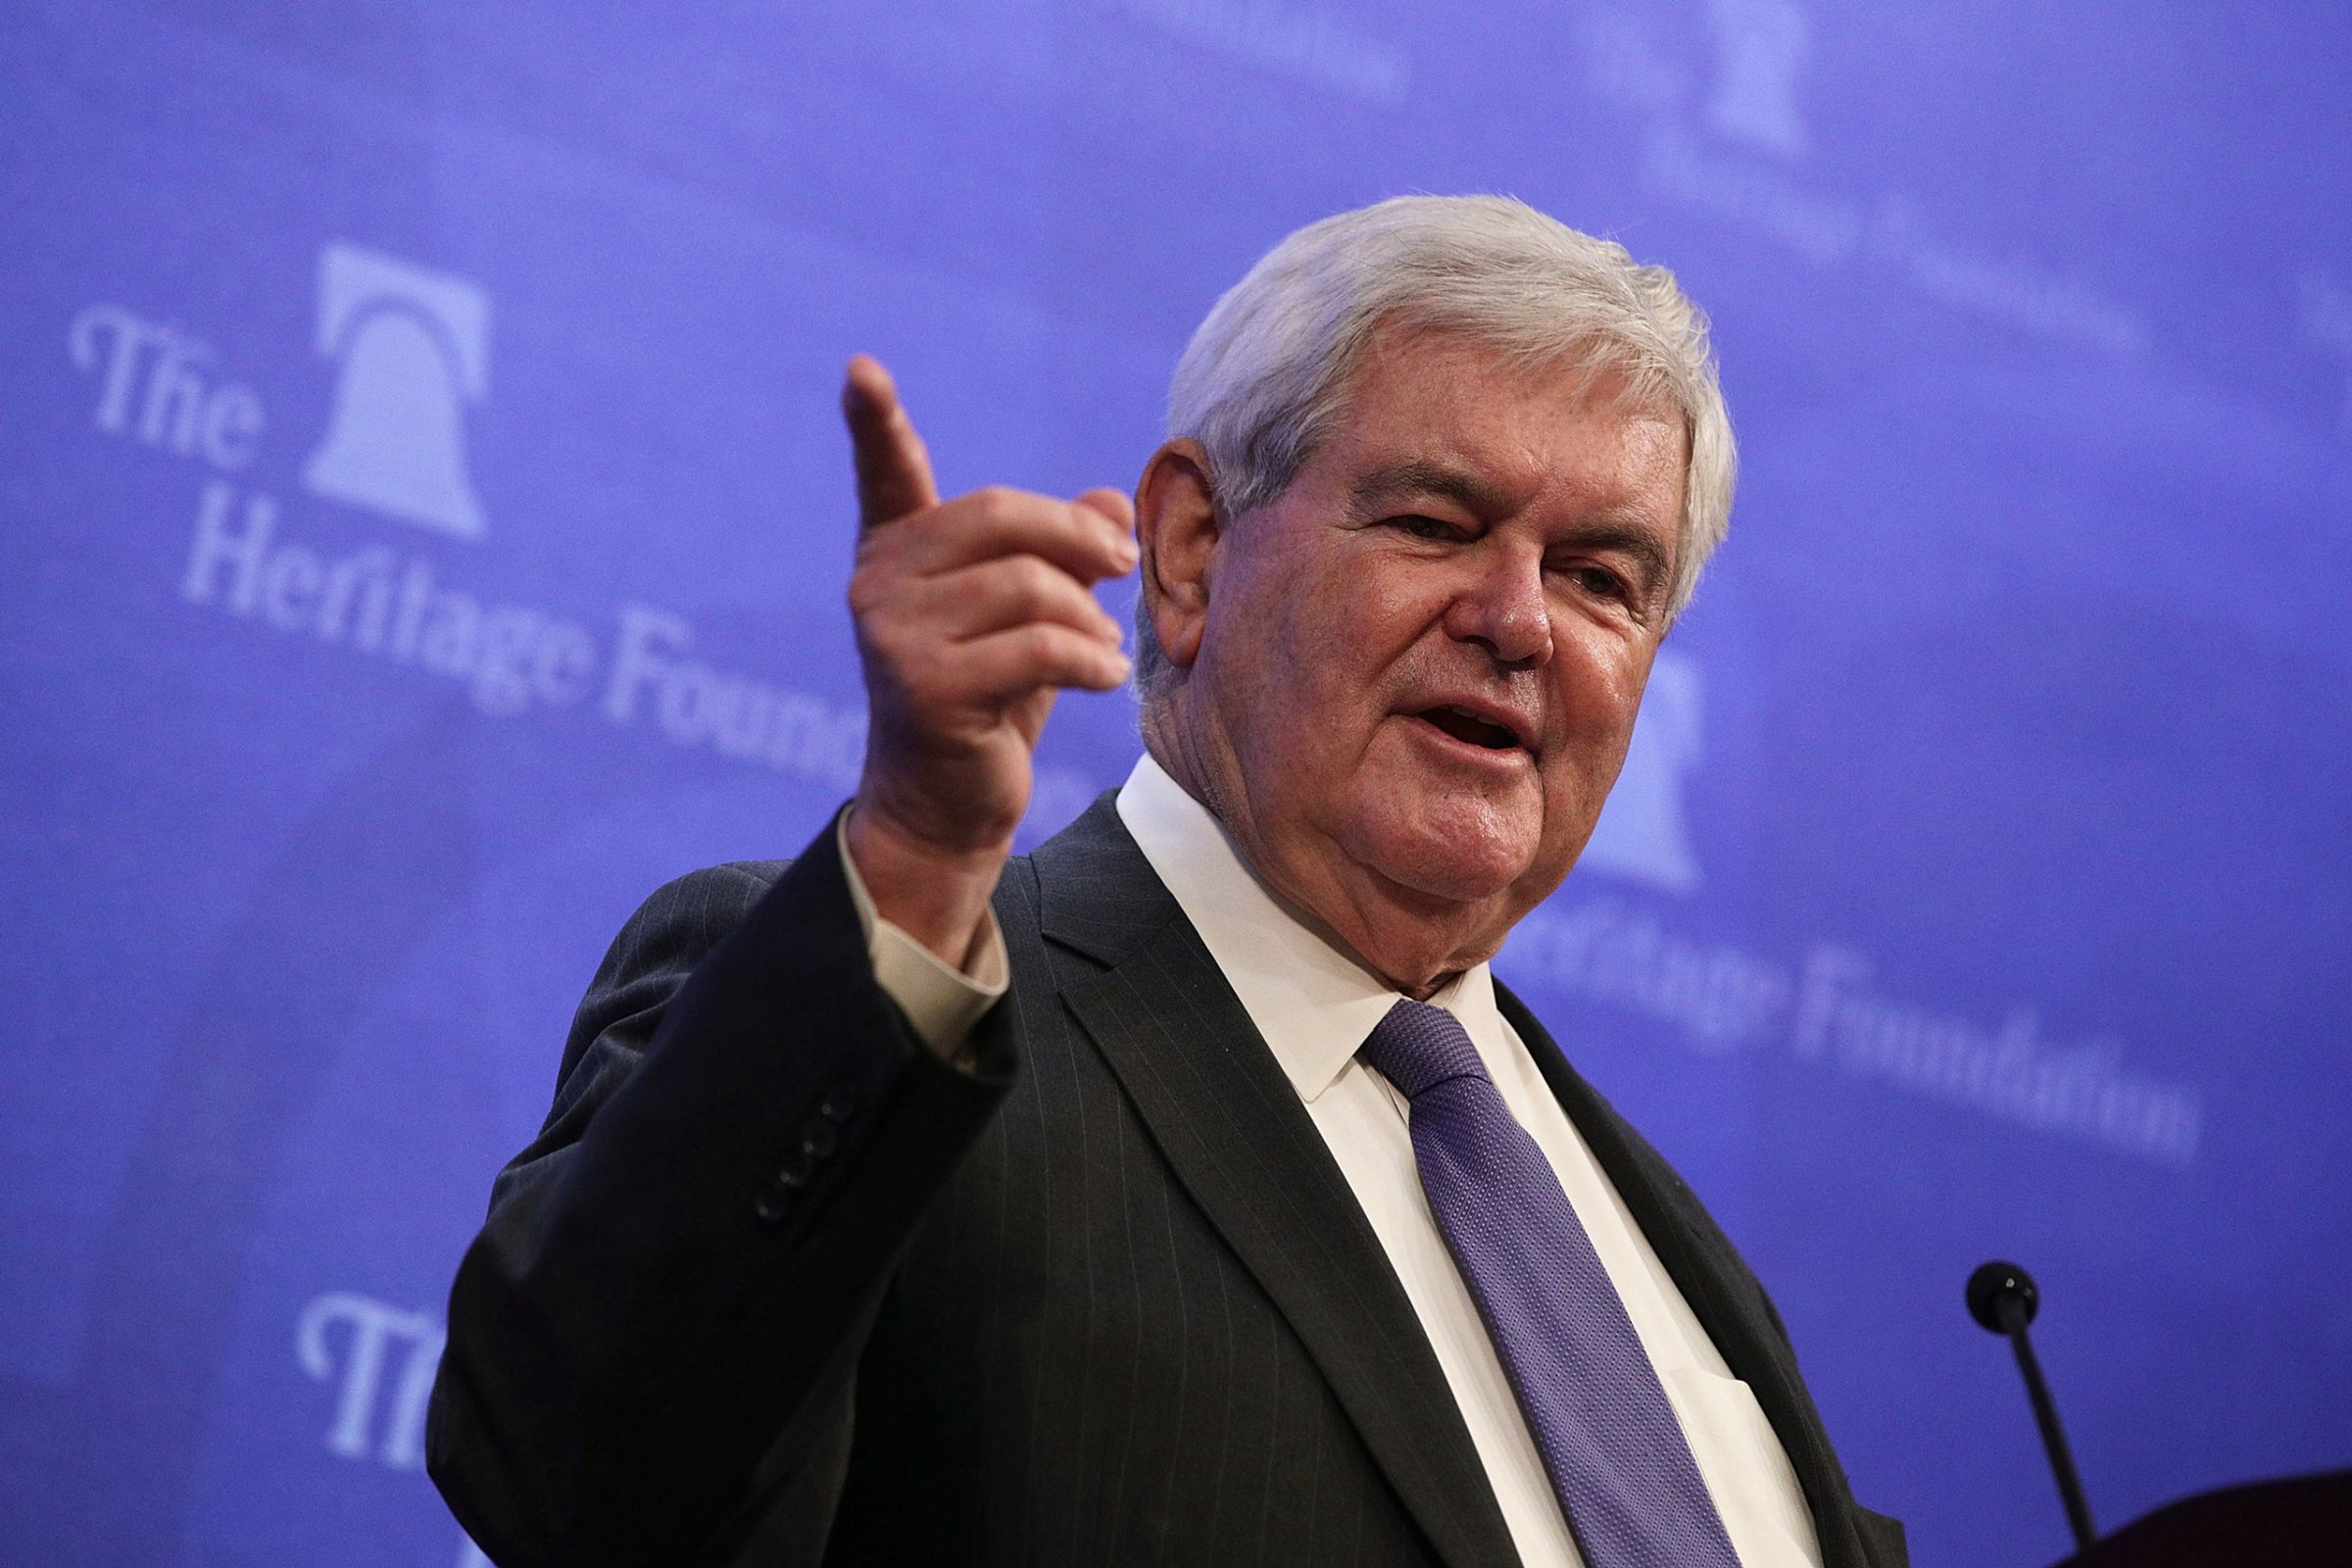 WASHINGTON, DC - DECEMBER 13: Former U.S. Speaker of the House Newt Gingrich (R-GA) speaks during a discussion at the Heritage Foundation December 13, 2016 in Washington, DC. Gingrich participated in a discussion on "The Principles of Trumpism." (Photo by Alex Wong/Getty Images)